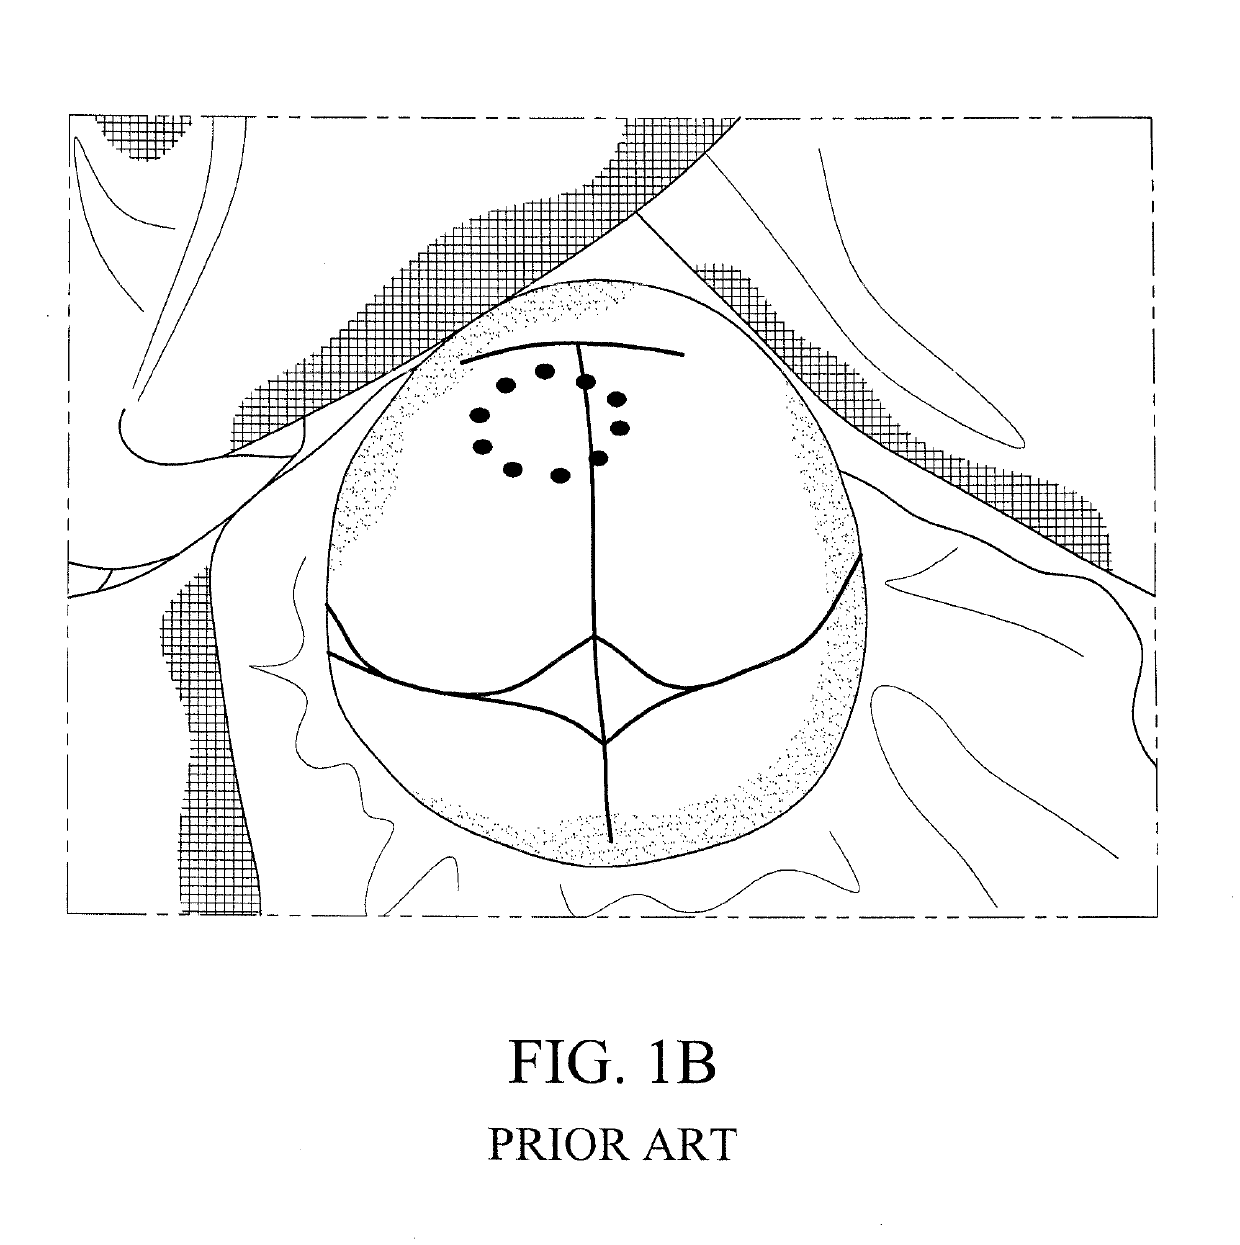 Method for performing single-stage cranioplasty reconstruction with a clear custom craniofacial implant